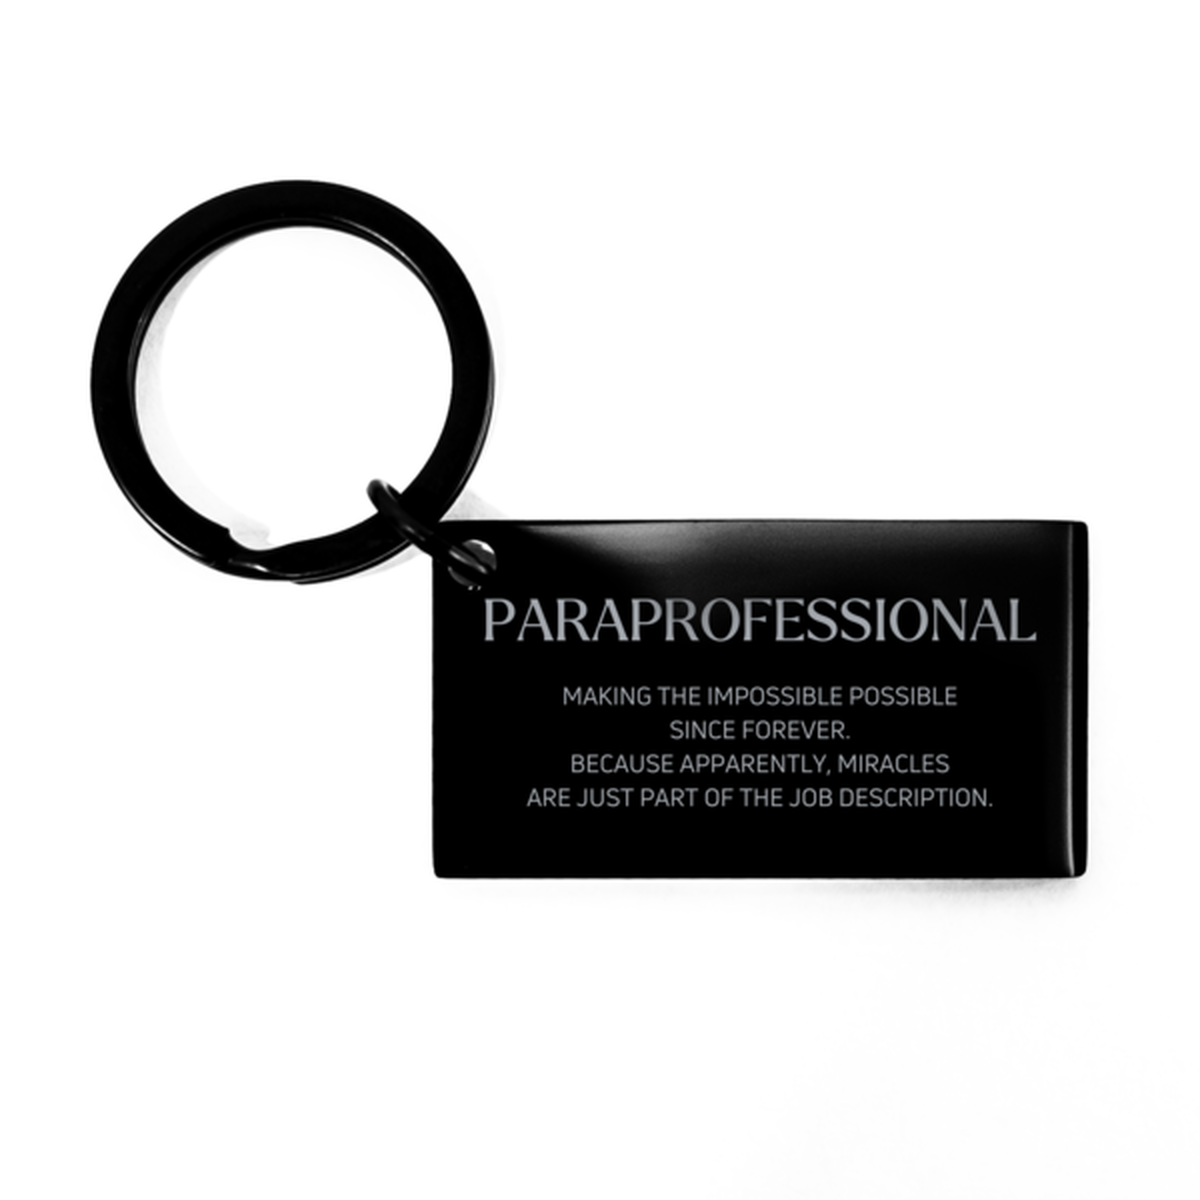 Funny Paraprofessional Gifts, Miracles are just part of the job description, Inspirational Birthday Keychain For Paraprofessional, Men, Women, Coworkers, Friends, Boss